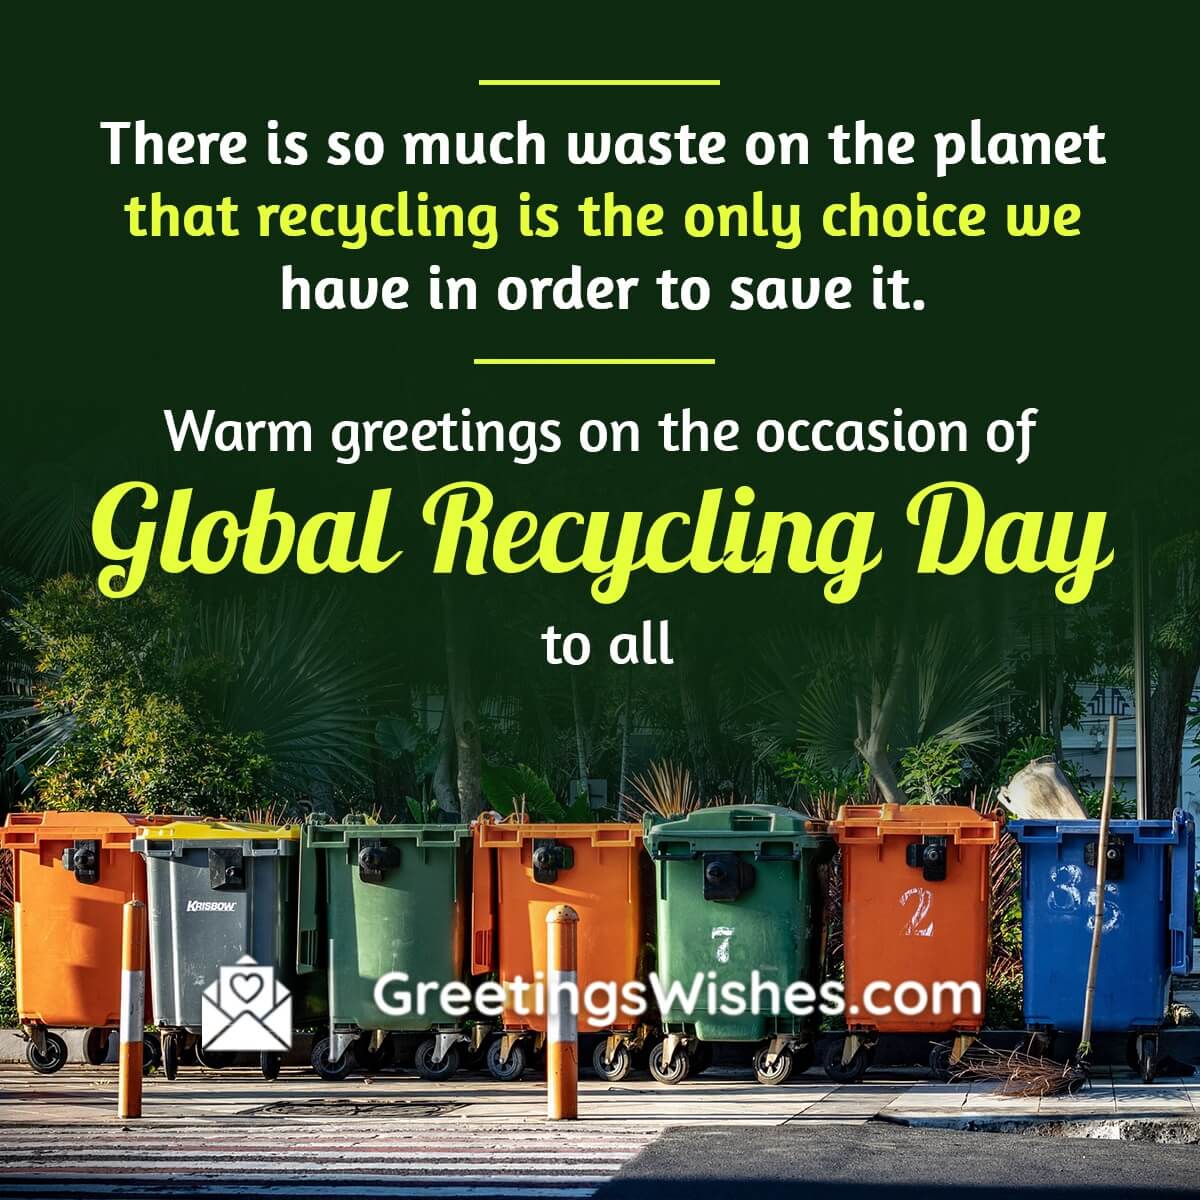 Global Recycling Day Greetings